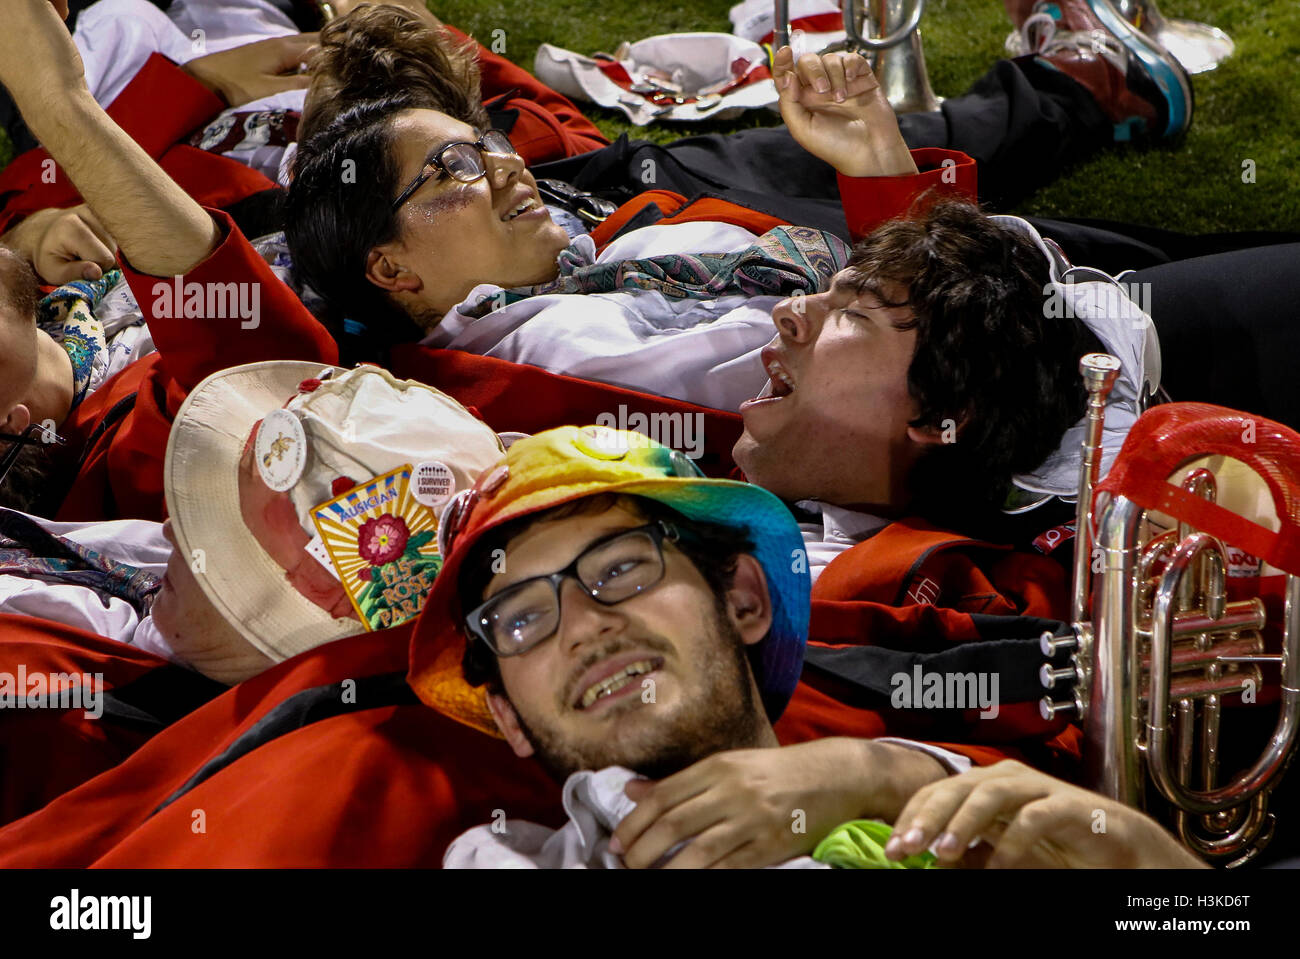 Palo Alto, California, USA. 8th Oct, 2016. The Stanford Band takes a breather during NCAA football action at Stanford University, featuring the Washington State Cougars visiting the Stanford Cardinal. Washington State won the game, 42-16. © Seth Riskin/ZUMA Wire/Alamy Live News Stock Photo